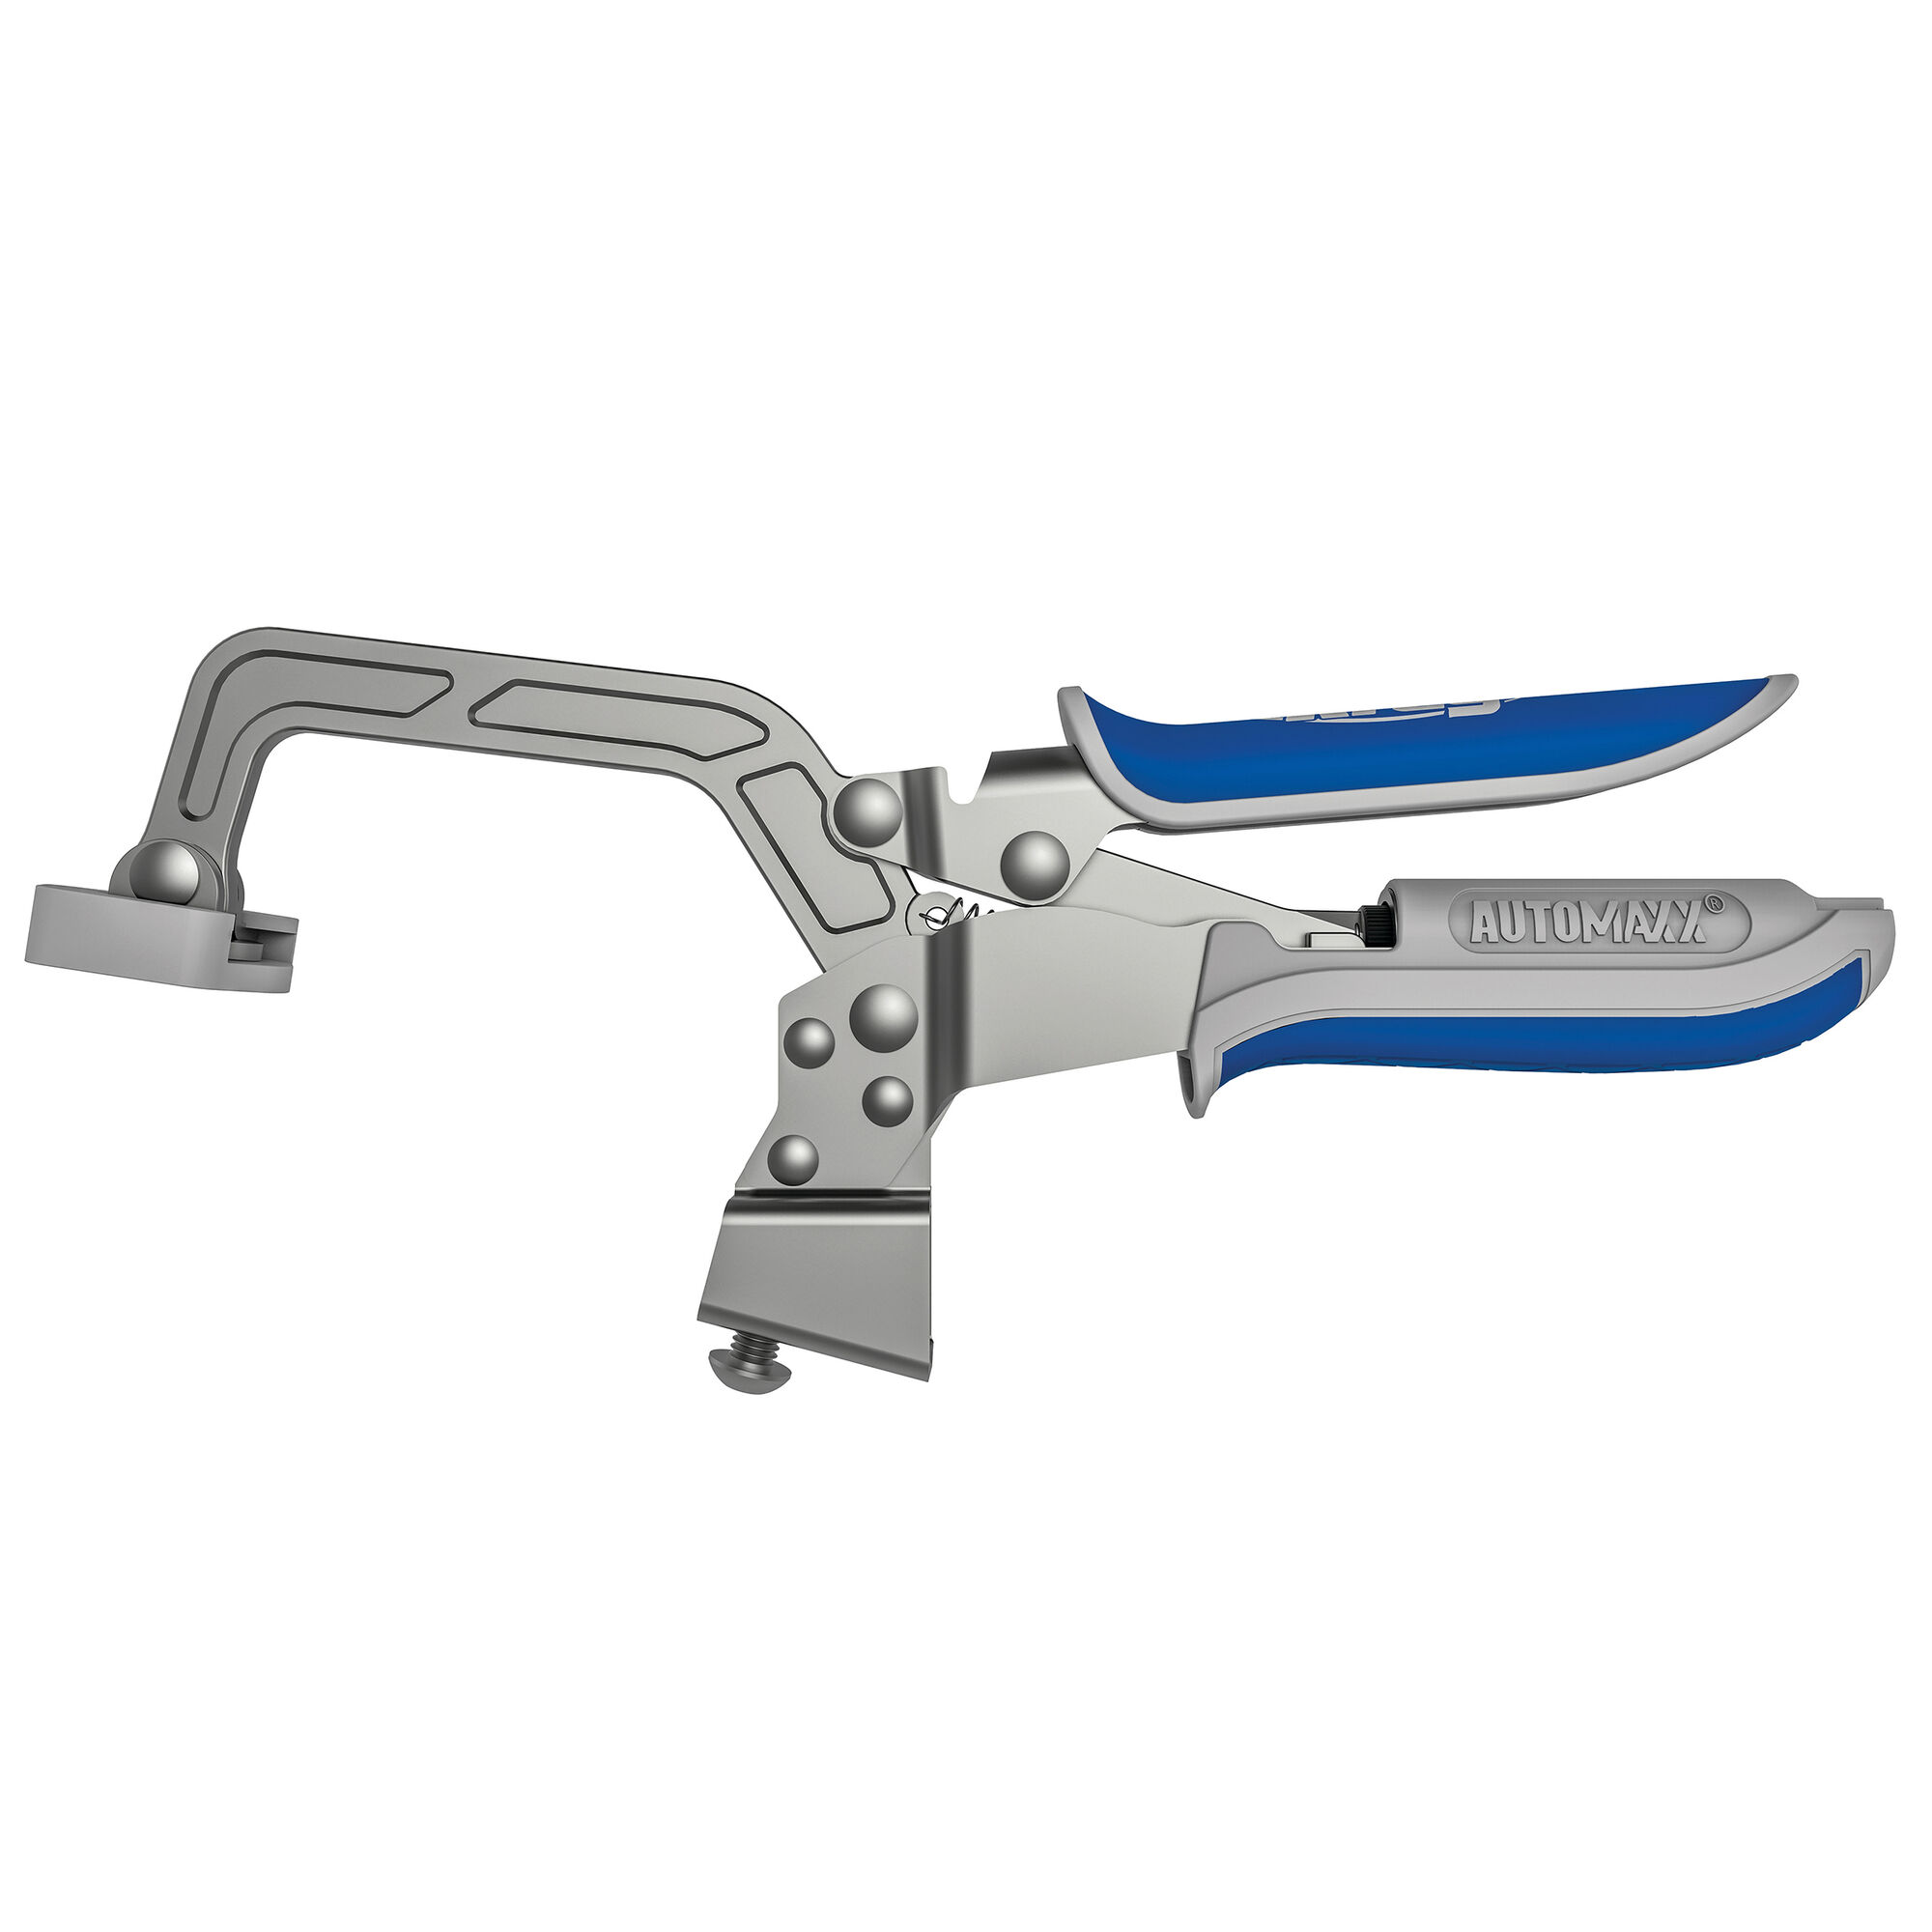 Details about  / KREG 3-inch Heavy-Duty Automaxx Bench Clamp System KBC3-HDSYS